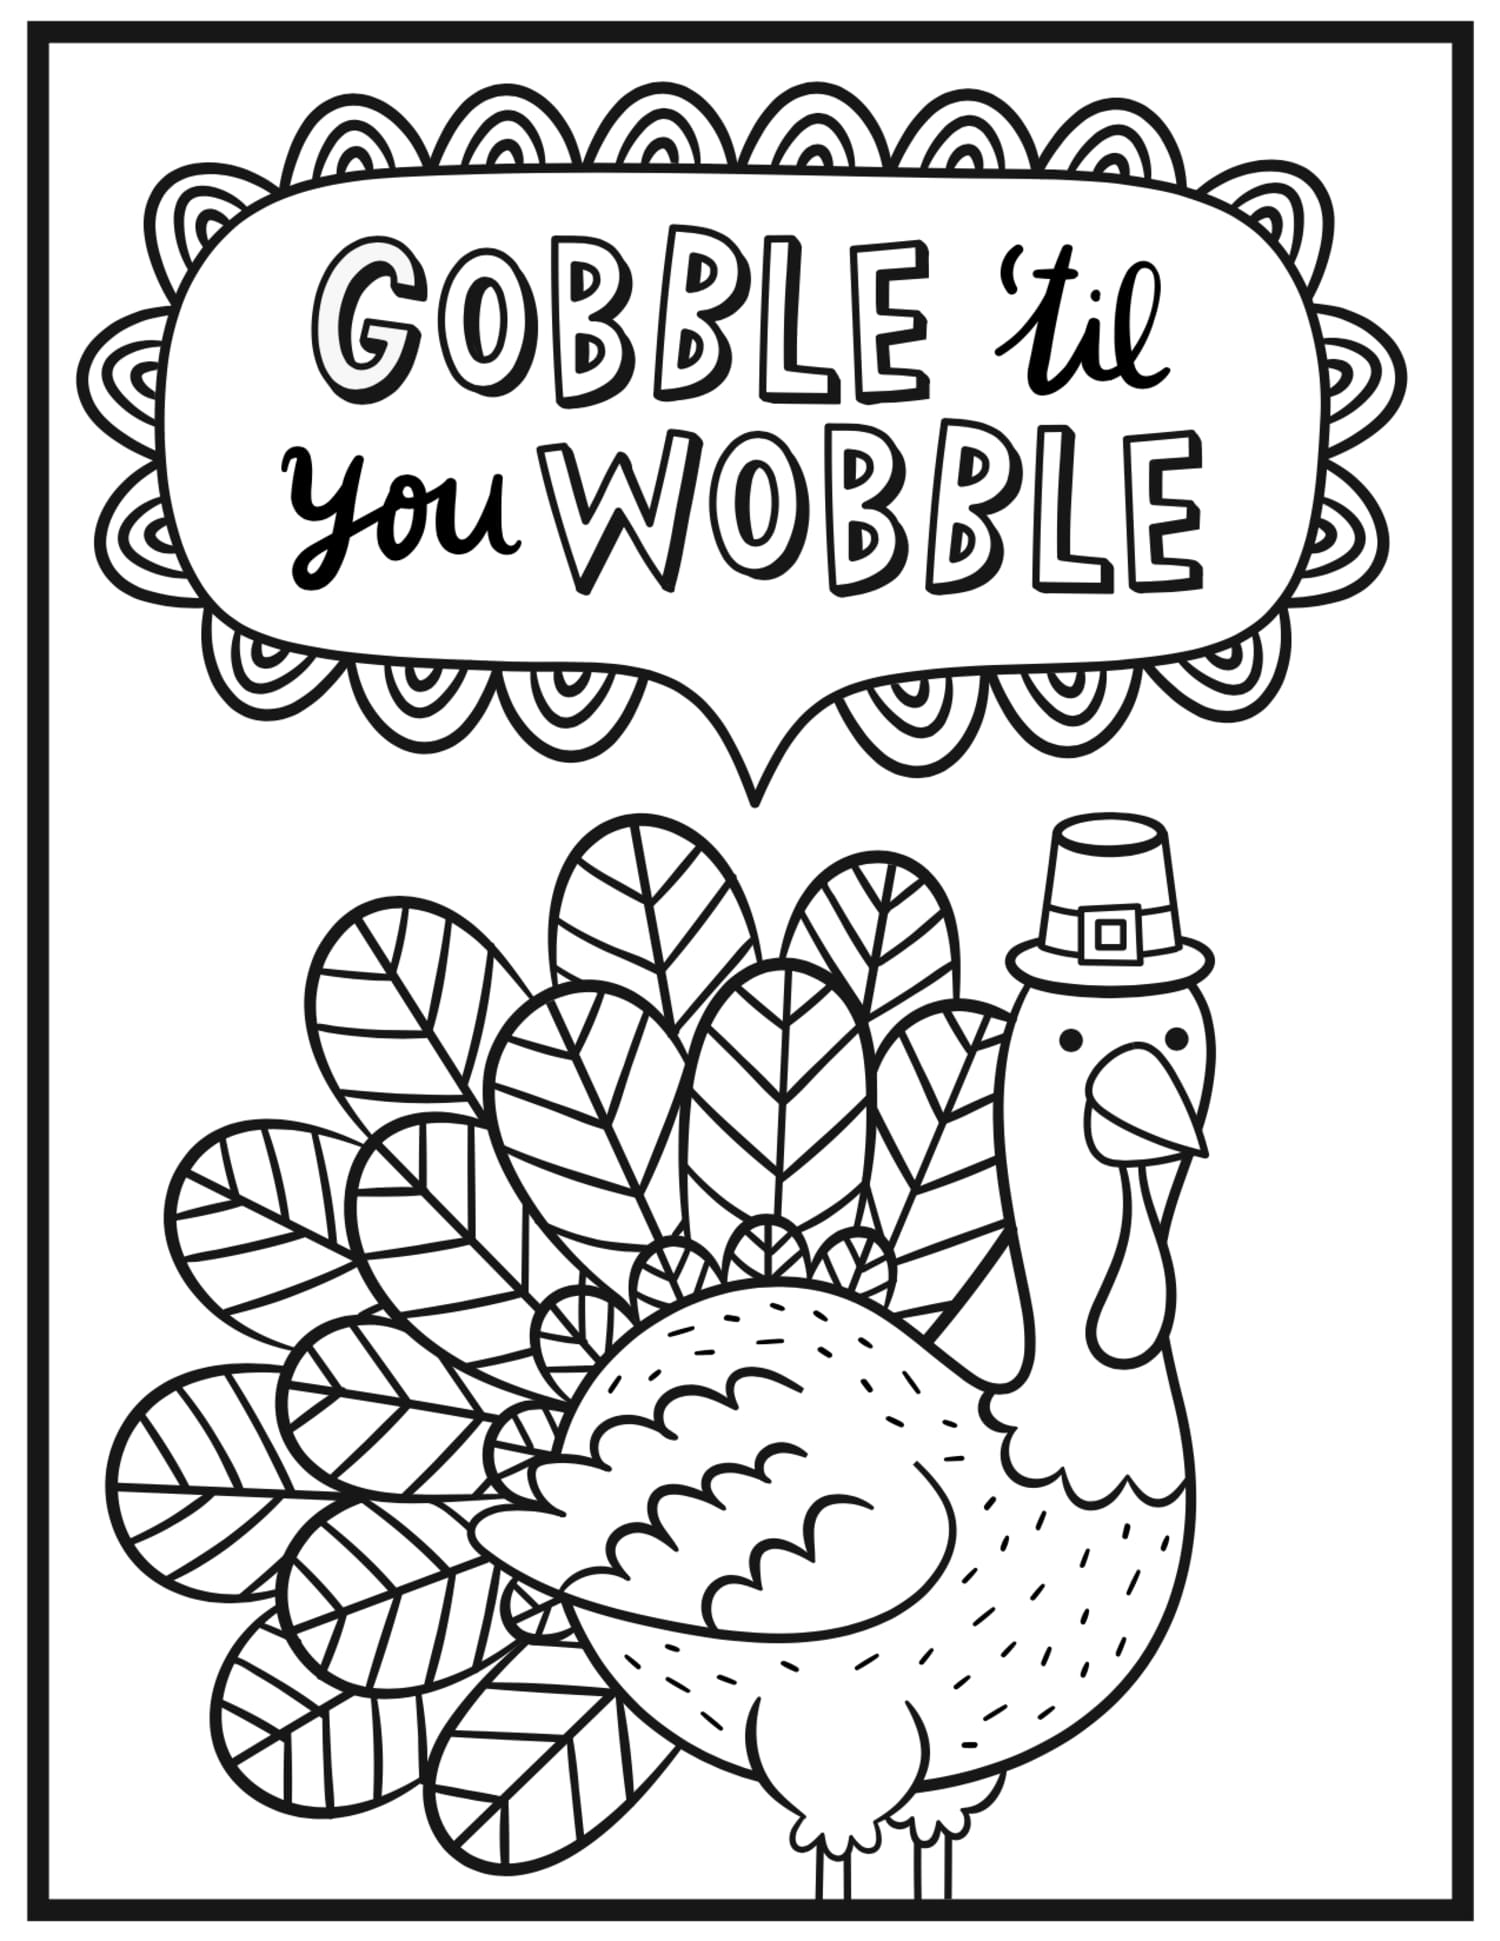 Download An Adult Coloring Page for Thanksgiving | Kitchn